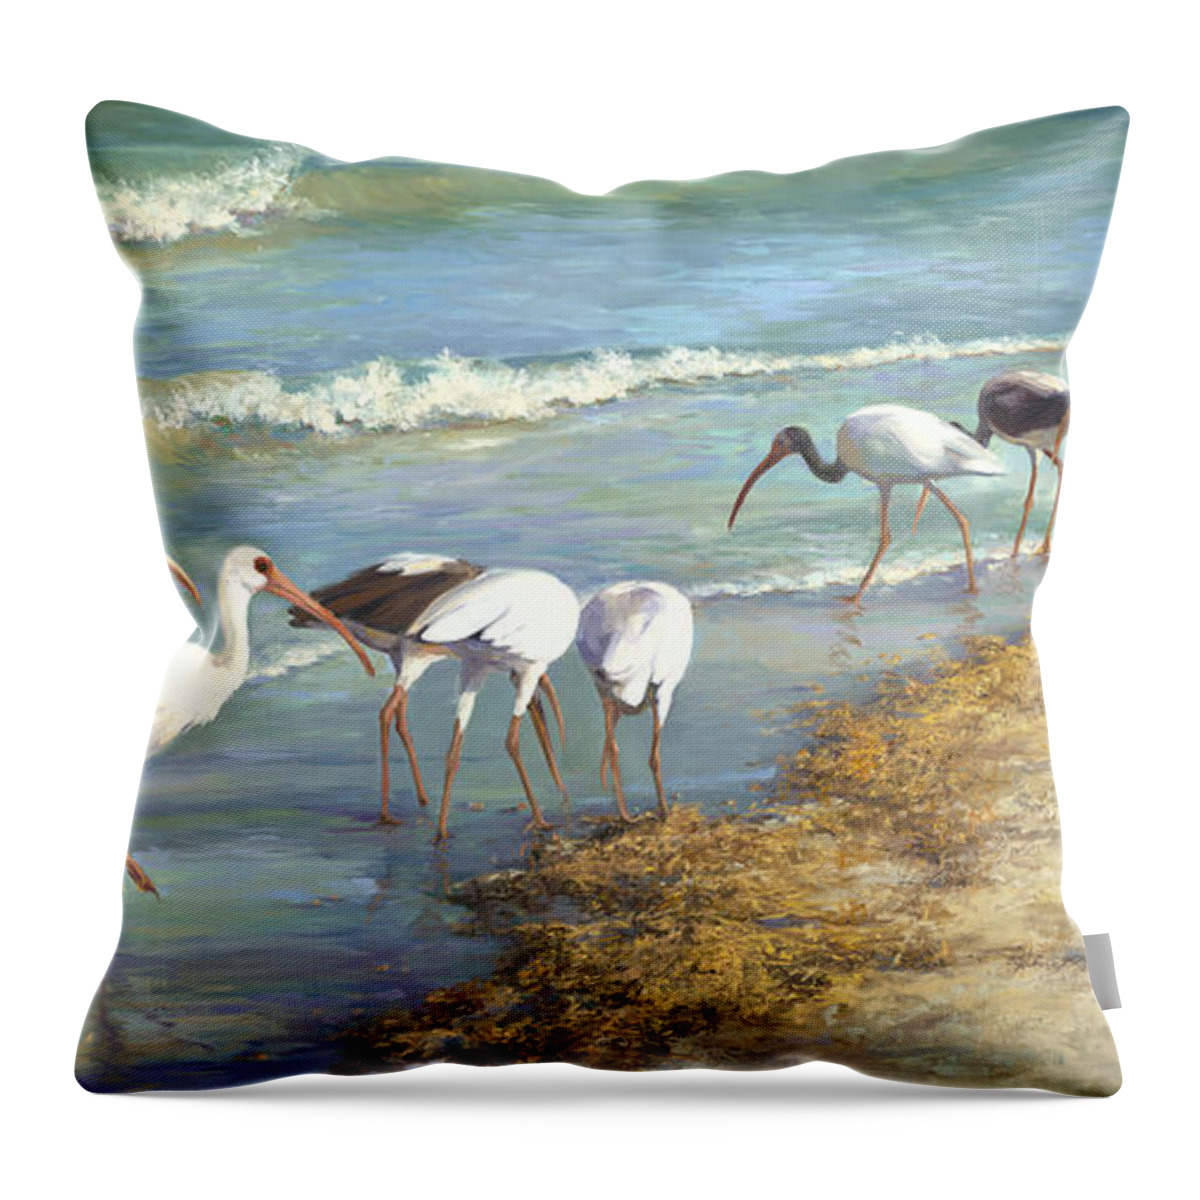 Ibis Throw Pillow featuring the painting Ibis on Marco Island by Laurie Snow Hein